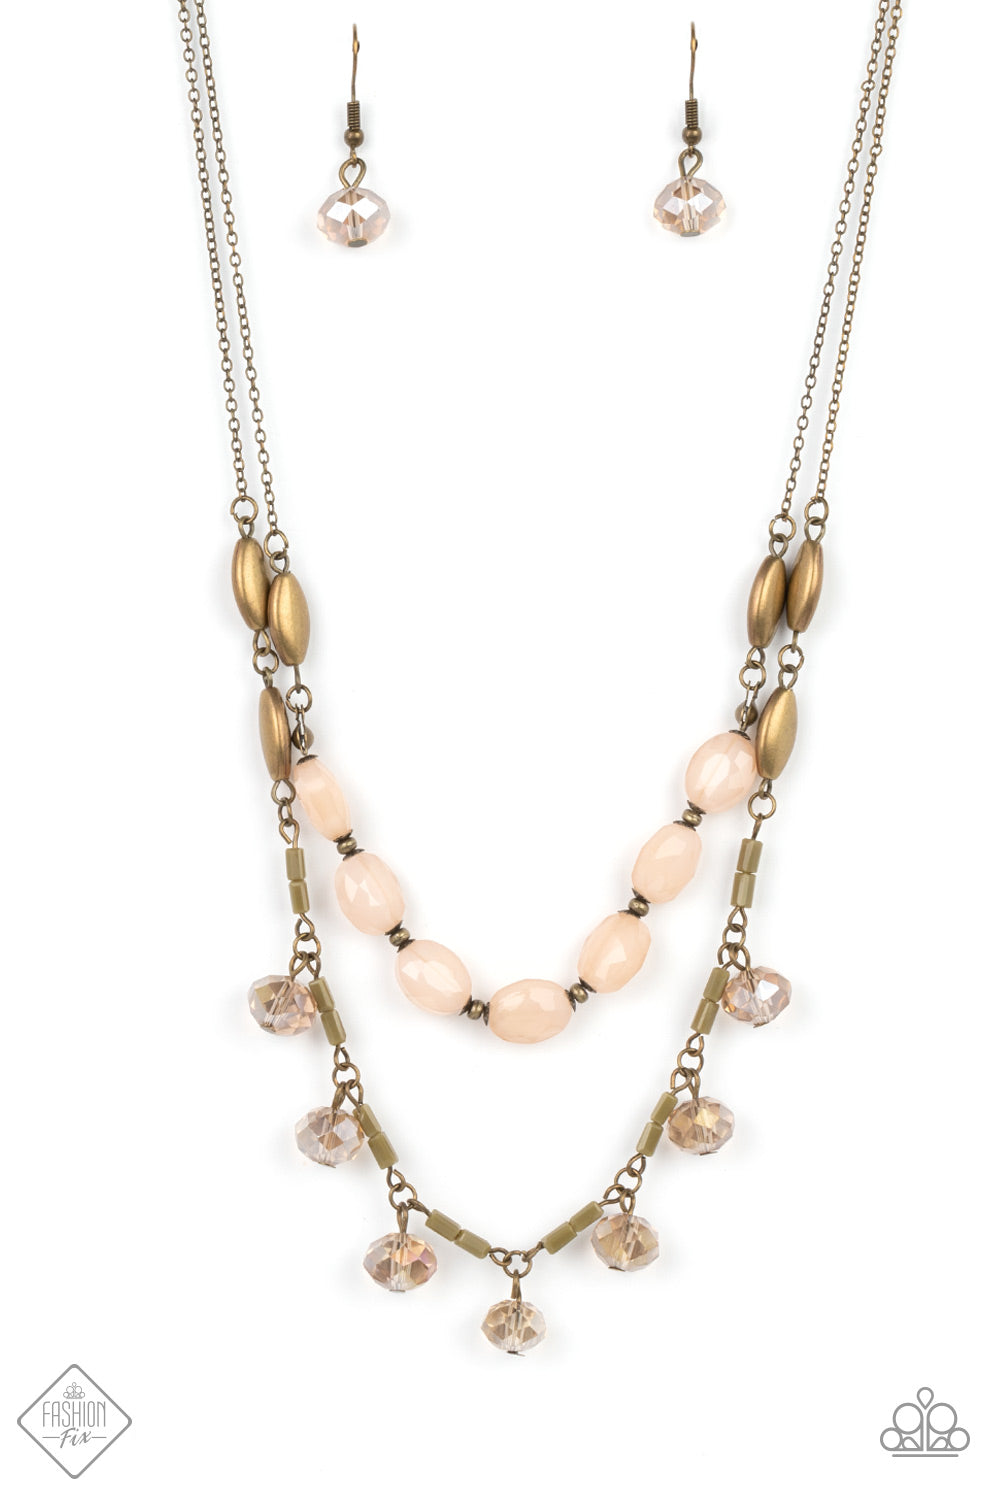 Sheen Season - Brass and Peach Necklace - Paparazzi Accessories - Two strands of dainty brass chain are adorned in a collection of peachy opaque beads, faceted glass beads, and brass accents, culminating in a layered design rich with vintage character. The glassy beads that swing along the lower chain feature a subtle reflective surface in a cozy peach glow